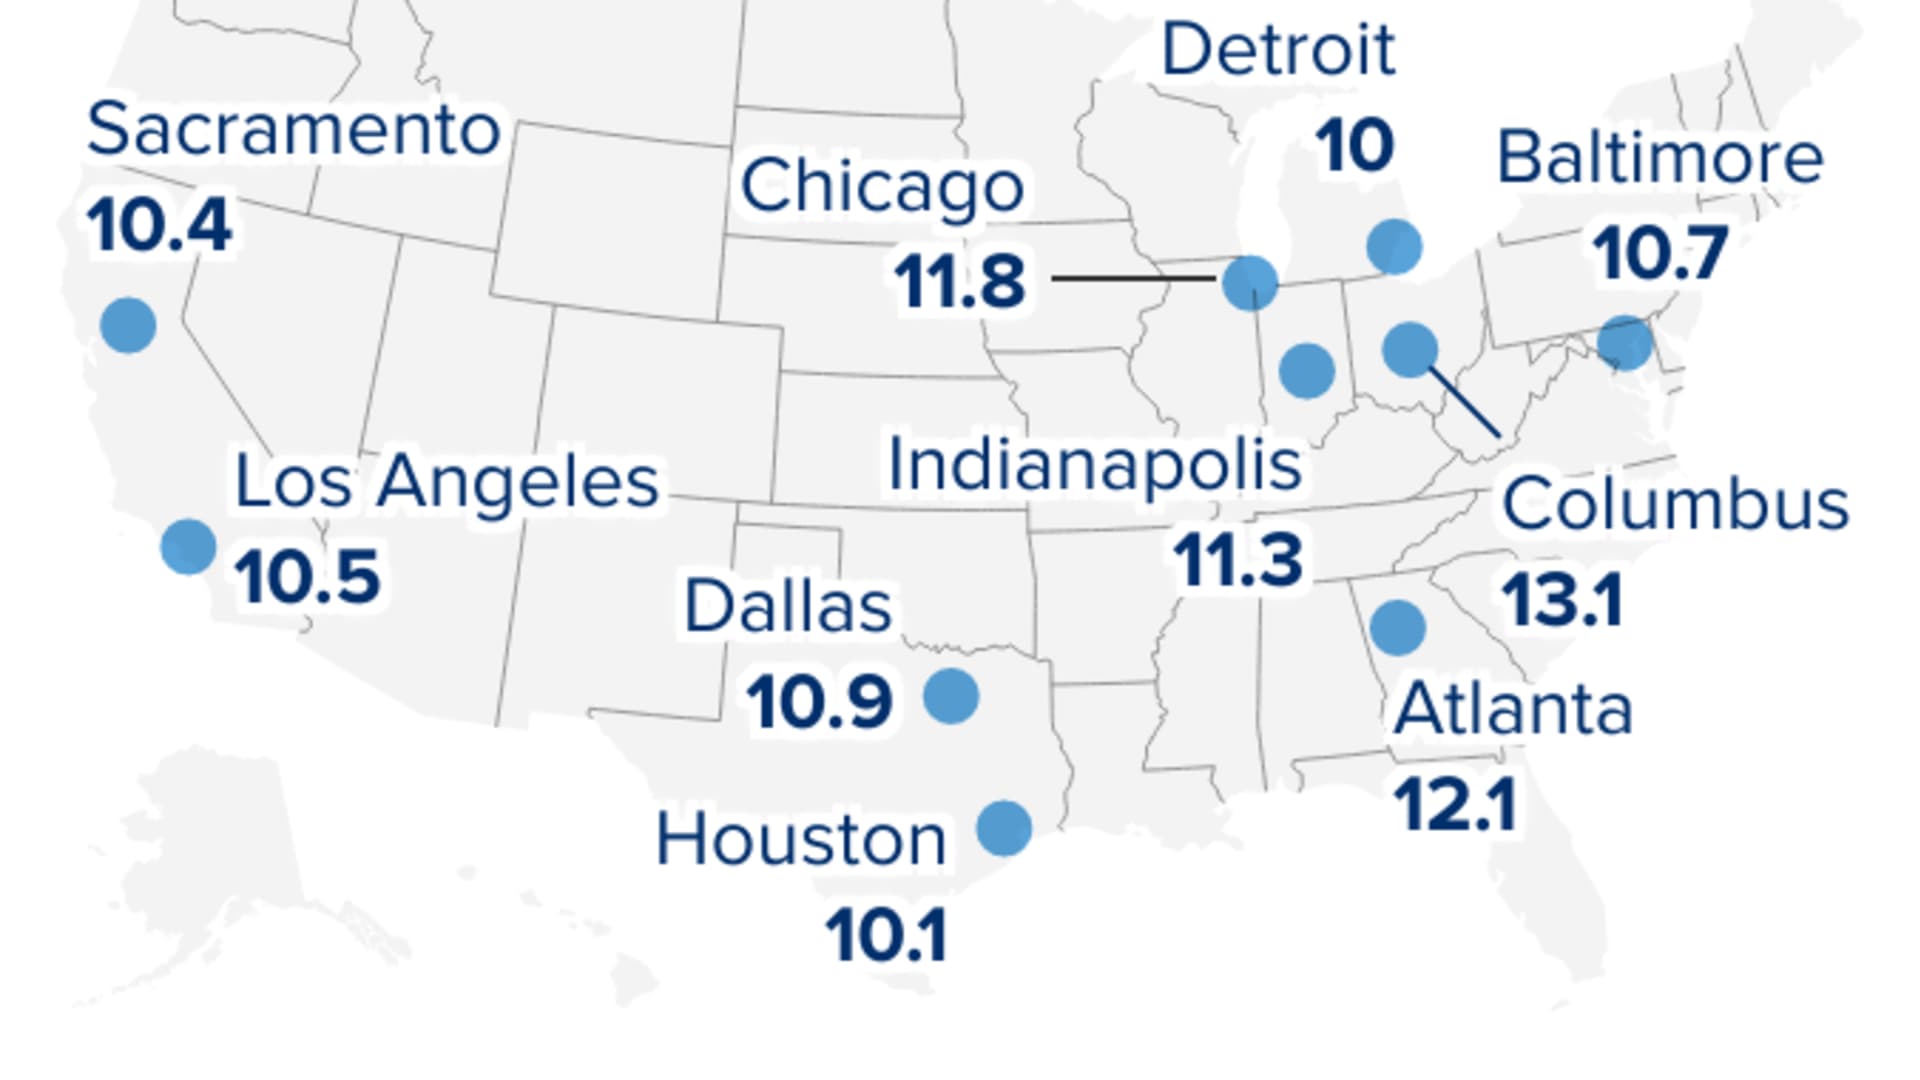 Here are the most polluted cities in the U.S. and world